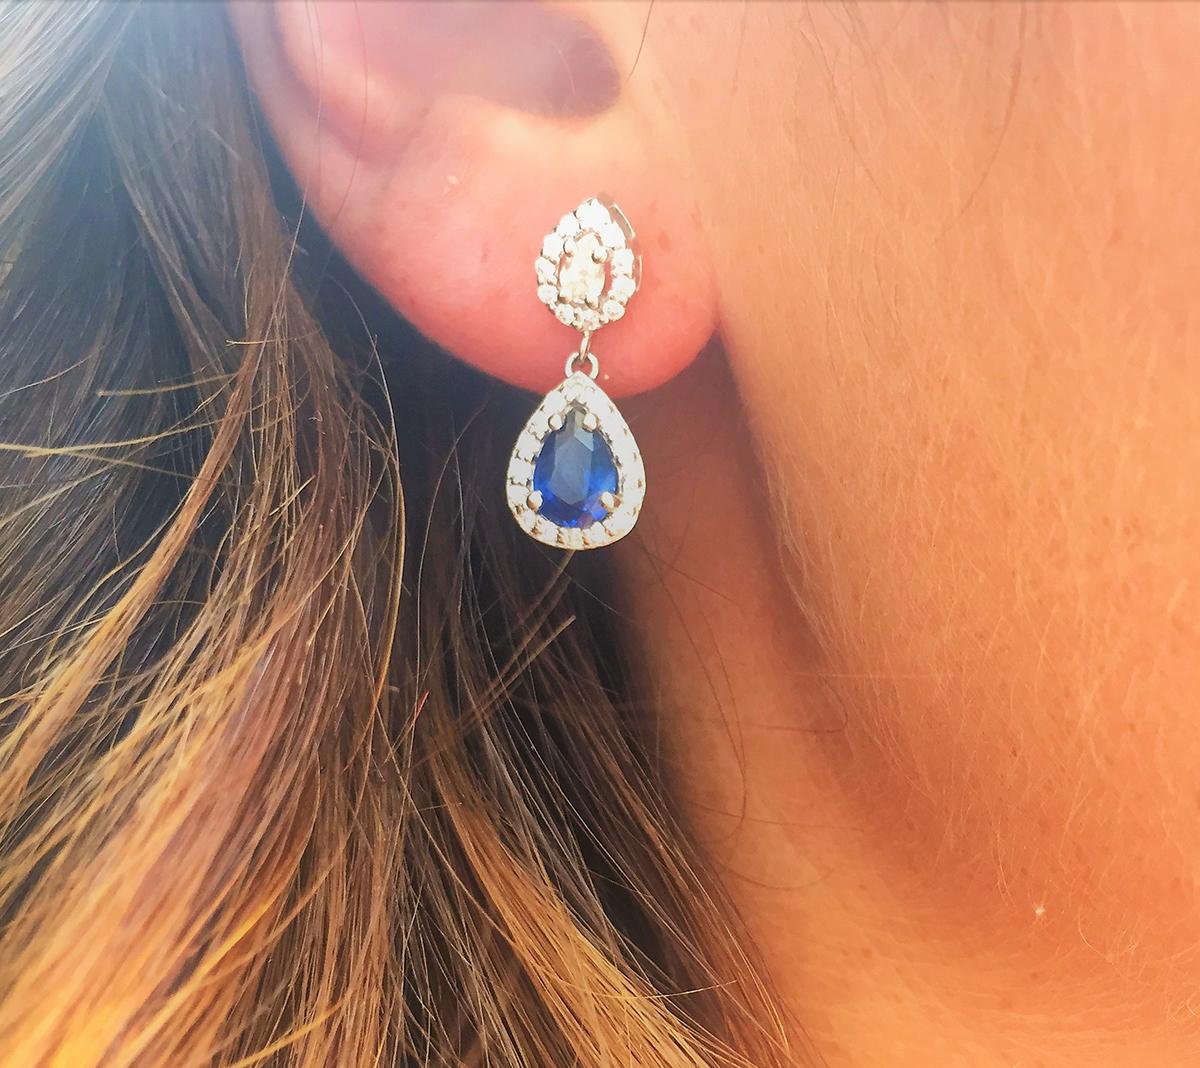 Featuring 18k white gold double halo diamond earrings with pear shape blue sapphire drops 
Sapphire weighing 1.50 carats 
Pear shape diamond weighing 0.50 carats 
Surrounded by pave-set diamonds weight 0.50 carat 
New Earrings
Handmade in USA
The